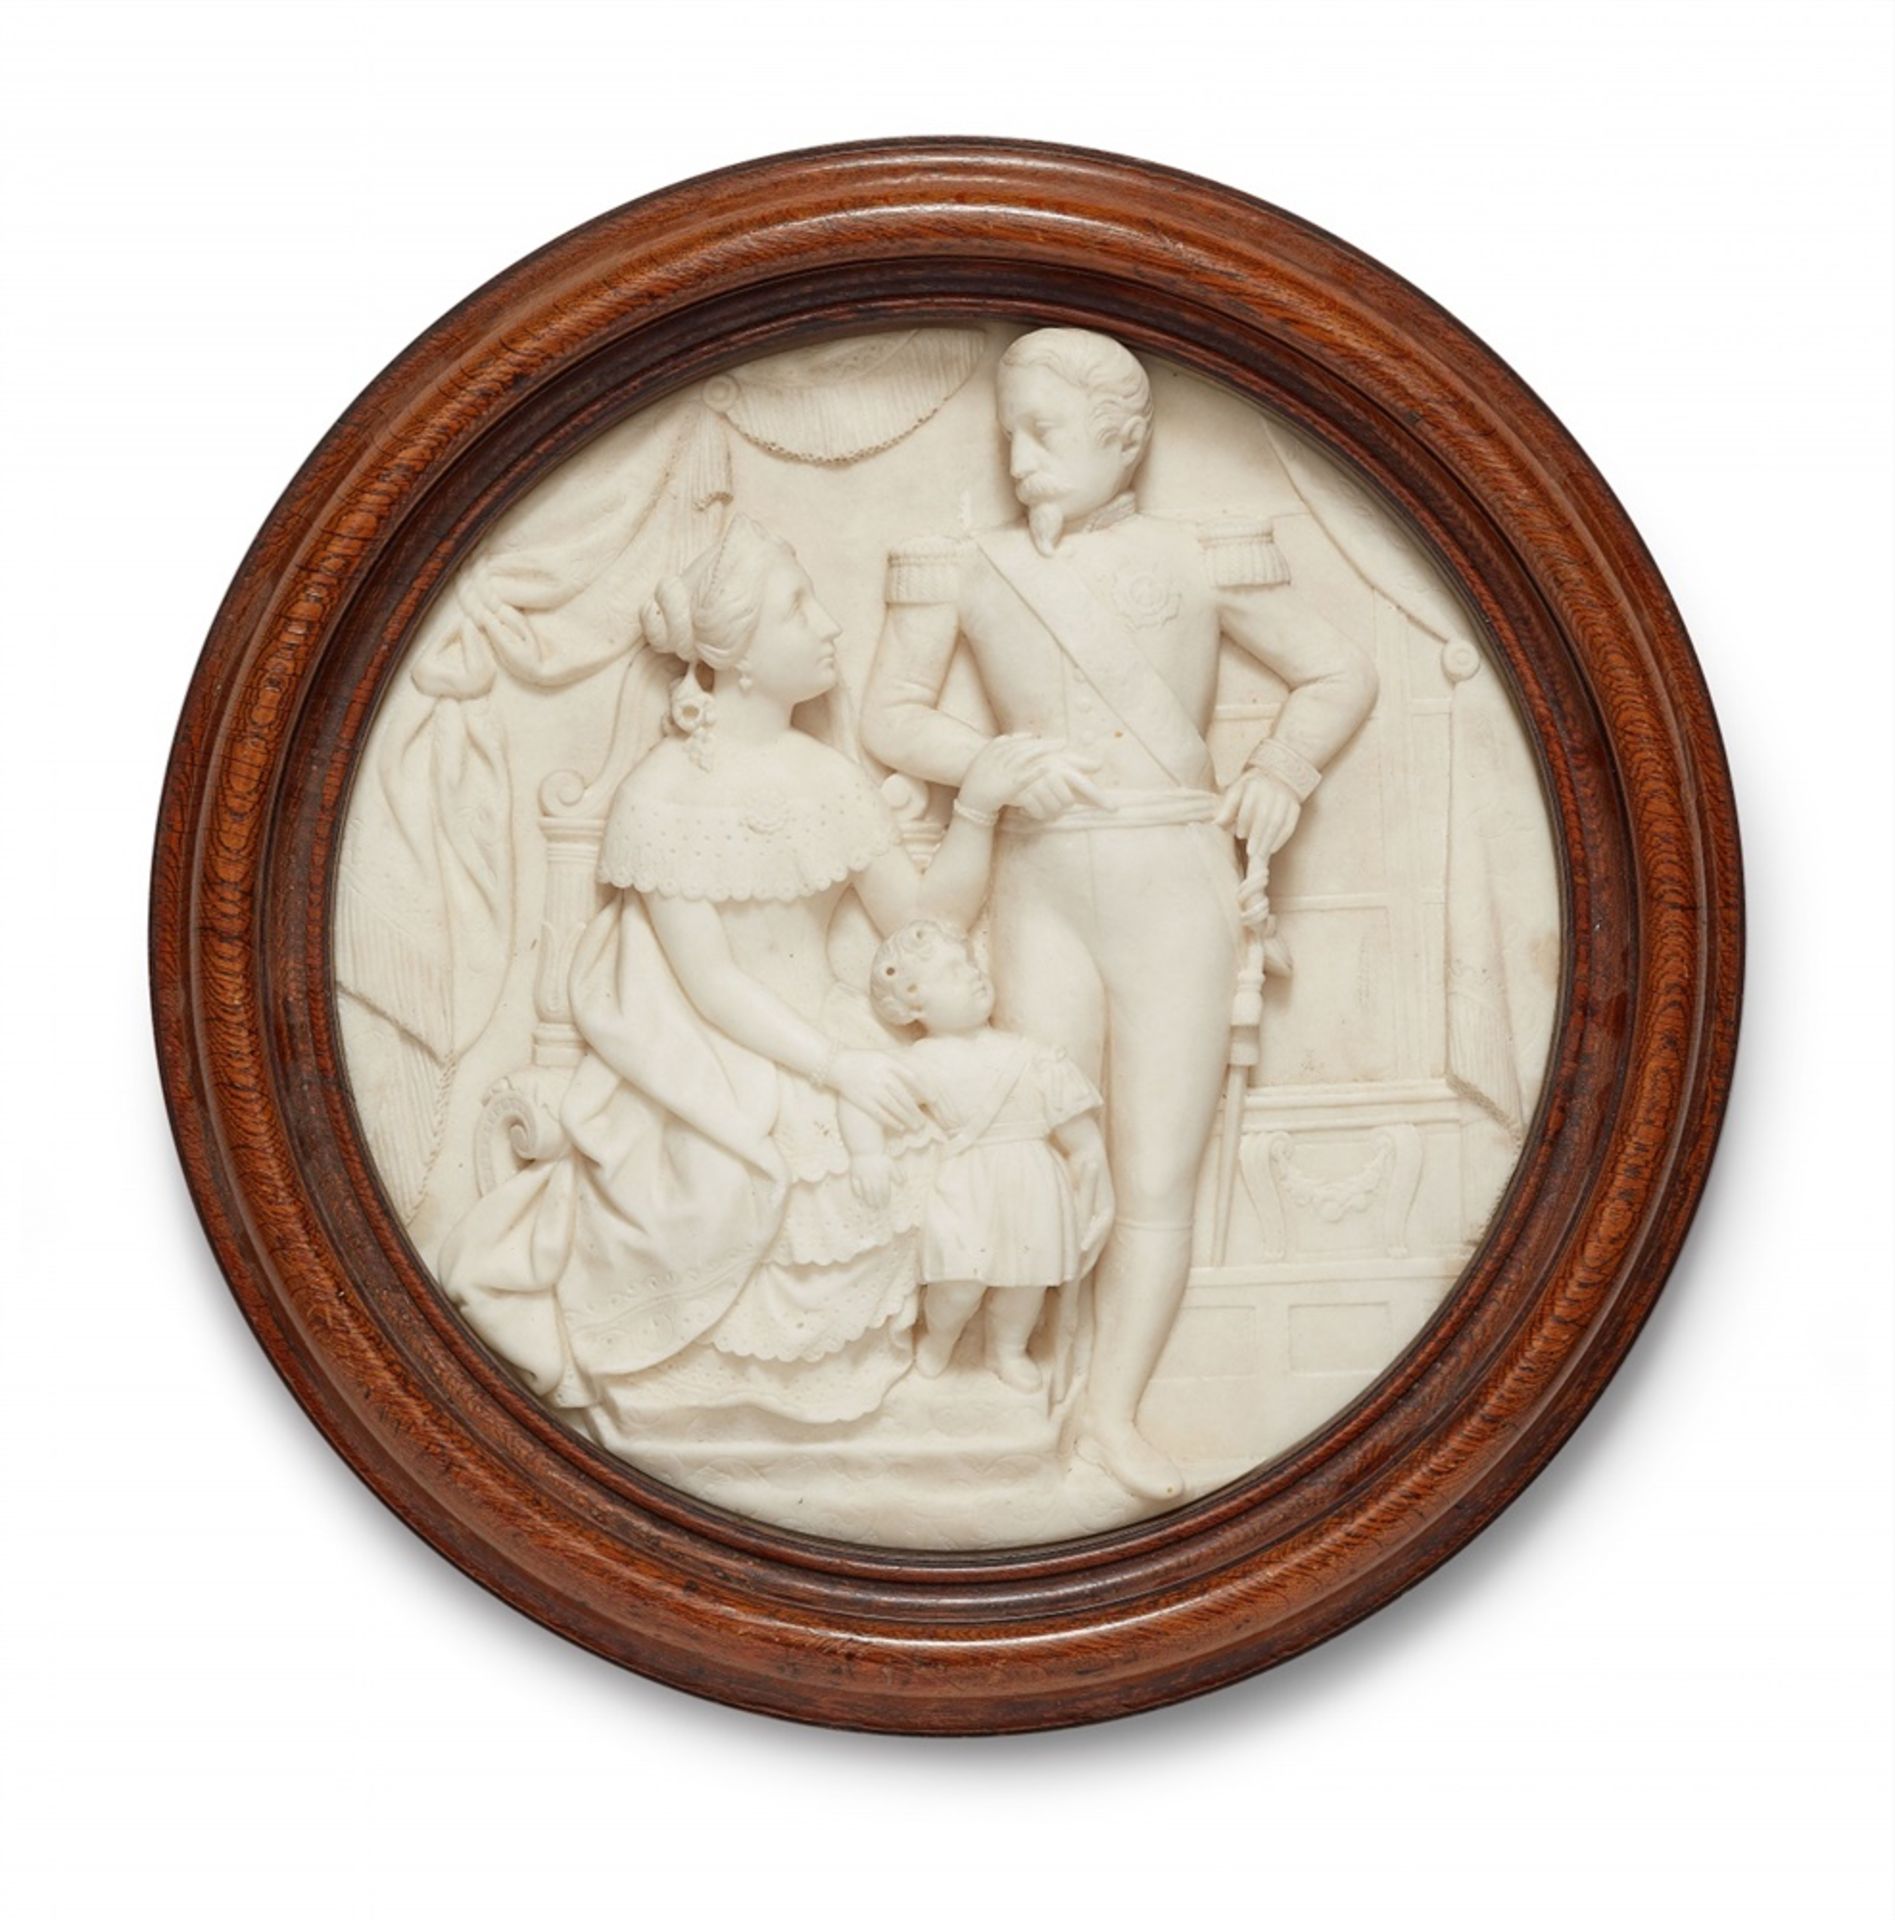 Two white marble tondi for Napoleon IIIRound relief plaques depicting a group portrait of "La